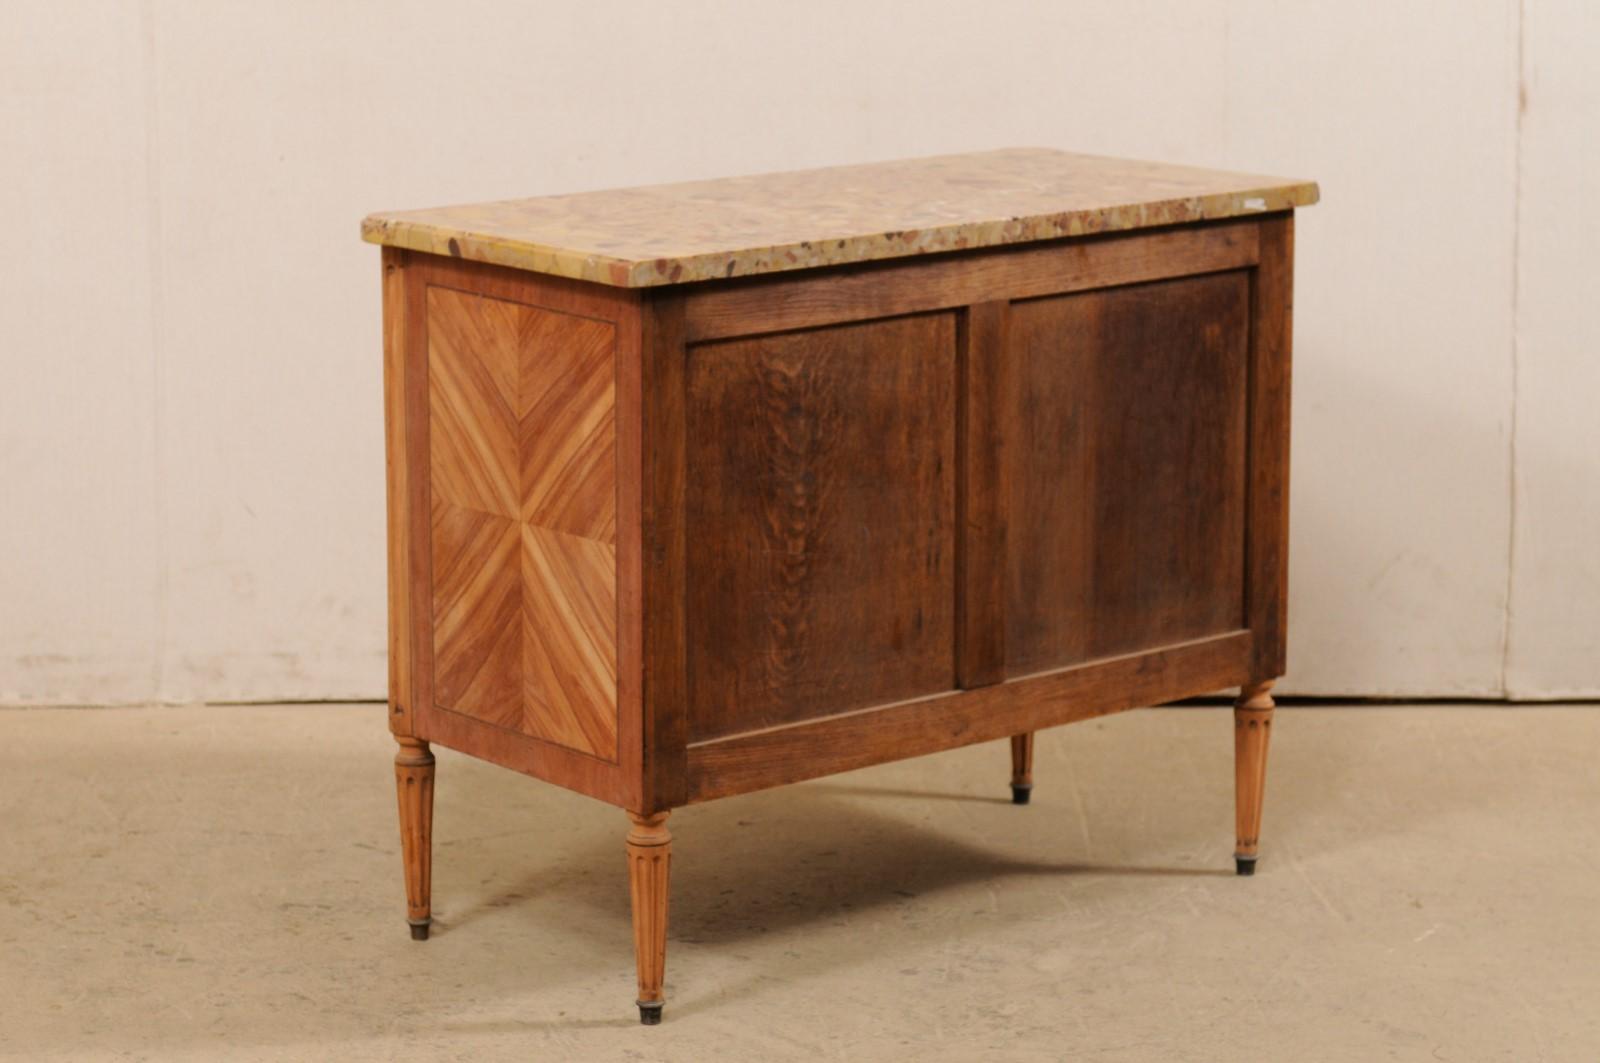 French Commode with Stone Top and Lovely Inlay Pattern Creating Visual Interest 4